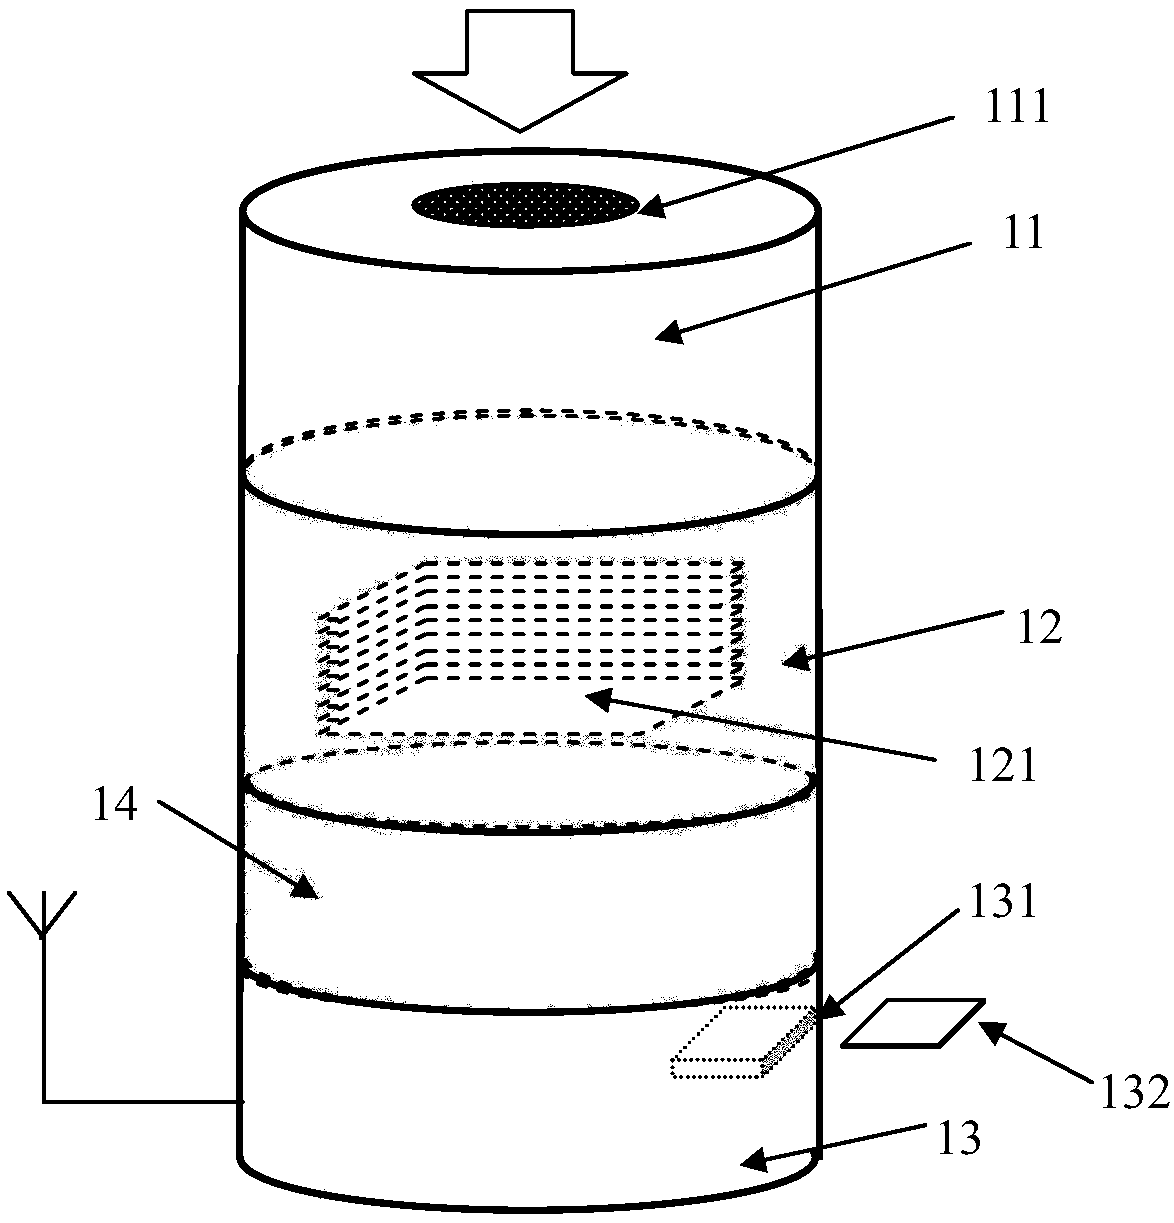 Flight data analytic recording device, system and method for spacecraft